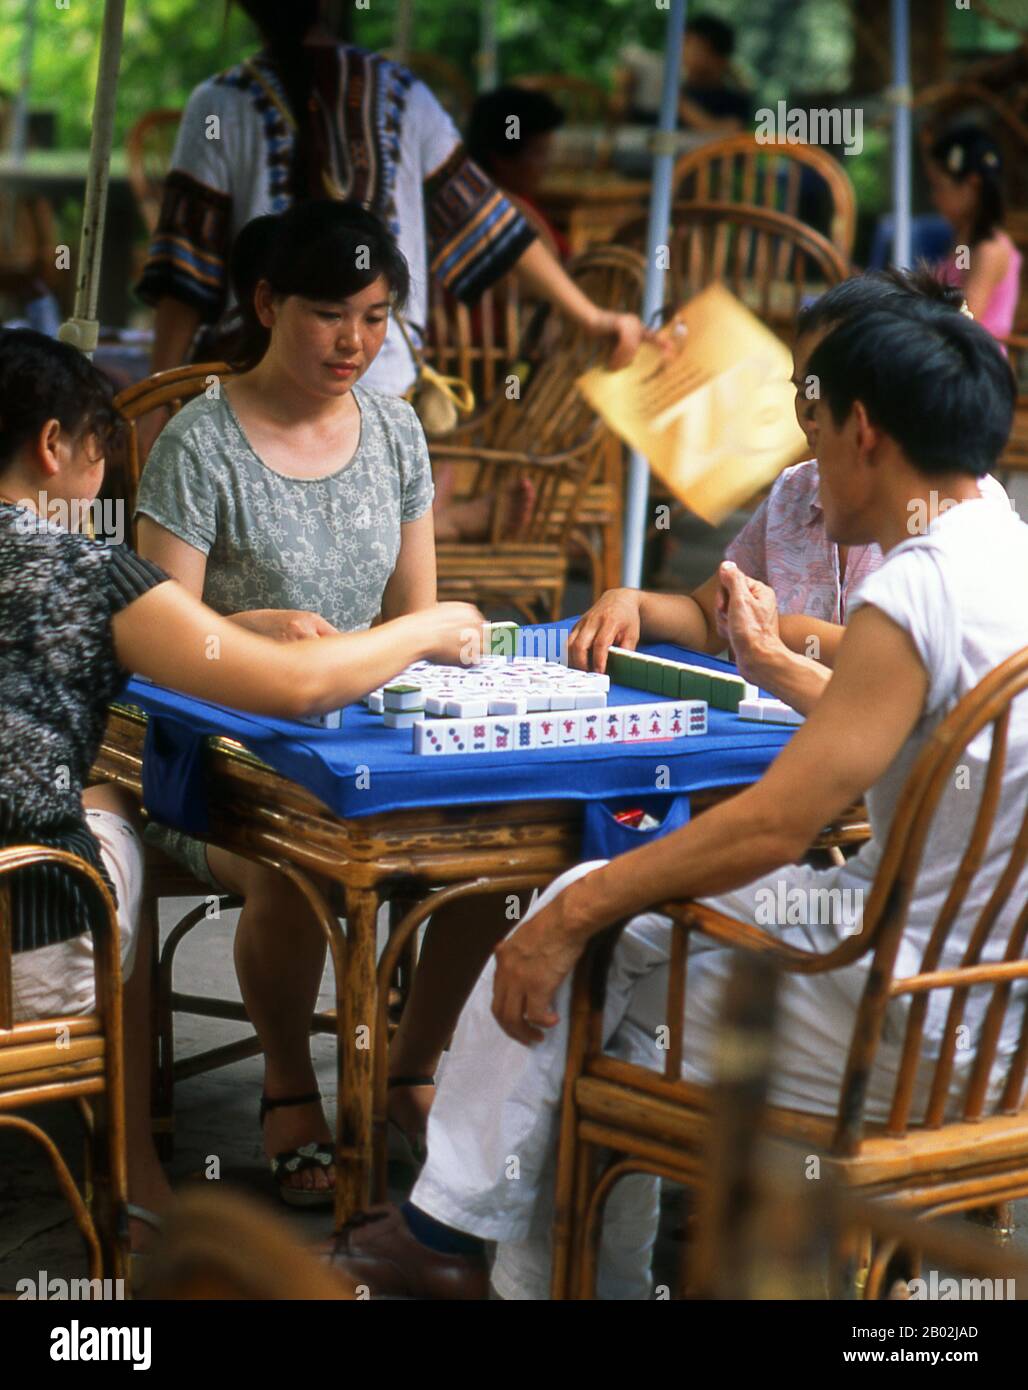 Mahjong is a game that originated in China, commonly played by four players (with some three-player variations found in Korea and Japan). Similar to the Western card game rummy, mahjong is a game of skill, strategy and calculation and involves a certain degree of chance. In Asia, mahjong is also popularly played as a gambling game (though it may just as easily be played recreationally).  The game is played with a set of 136 tiles based on Chinese characters and symbols, although some regional variations use a different number of tiles. In most variations, each player begins by receiving thirte Stock Photo